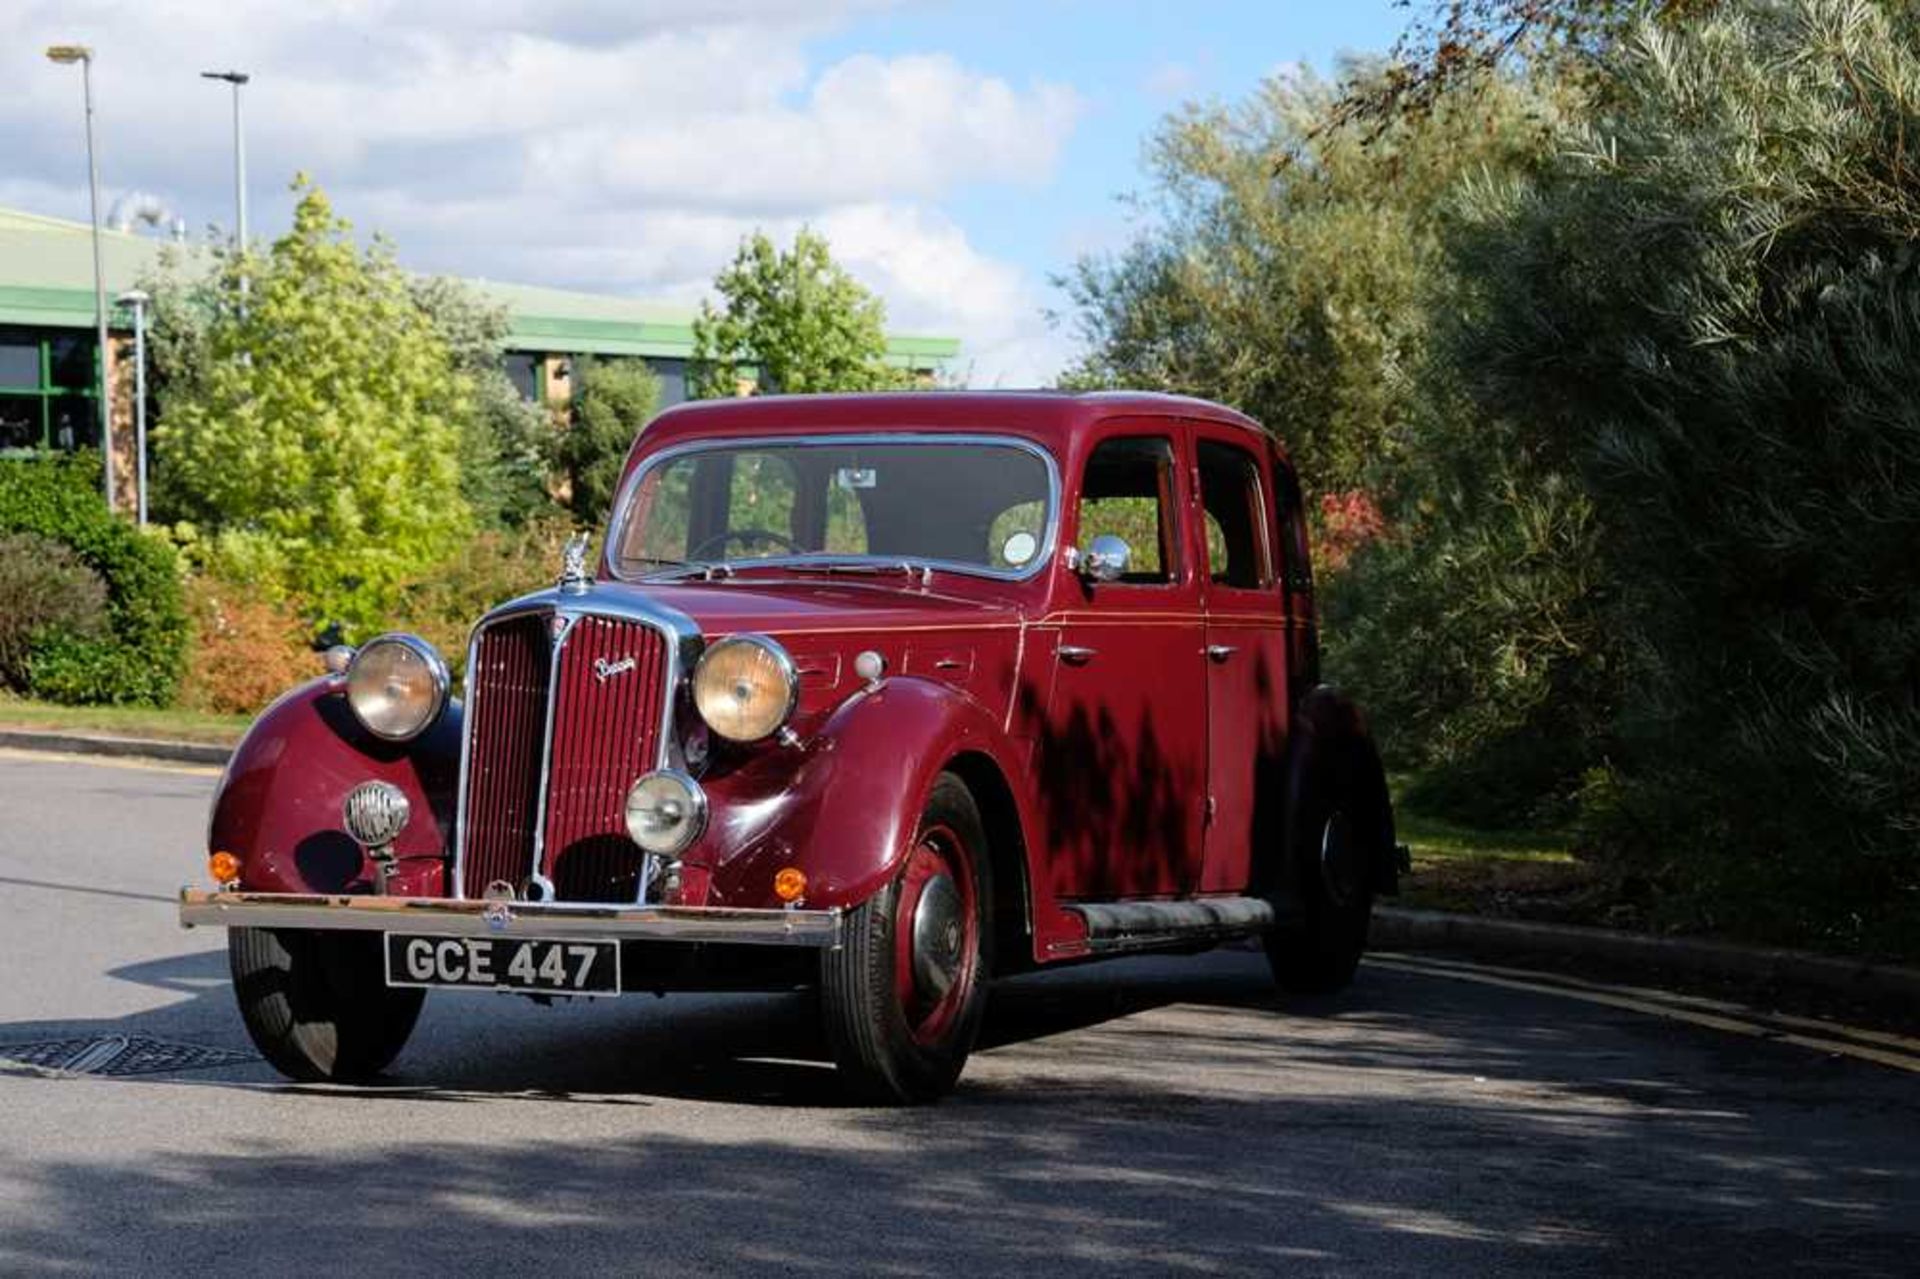 1947 Rover 16 P2 'Six-Light' Saloon - Image 7 of 58